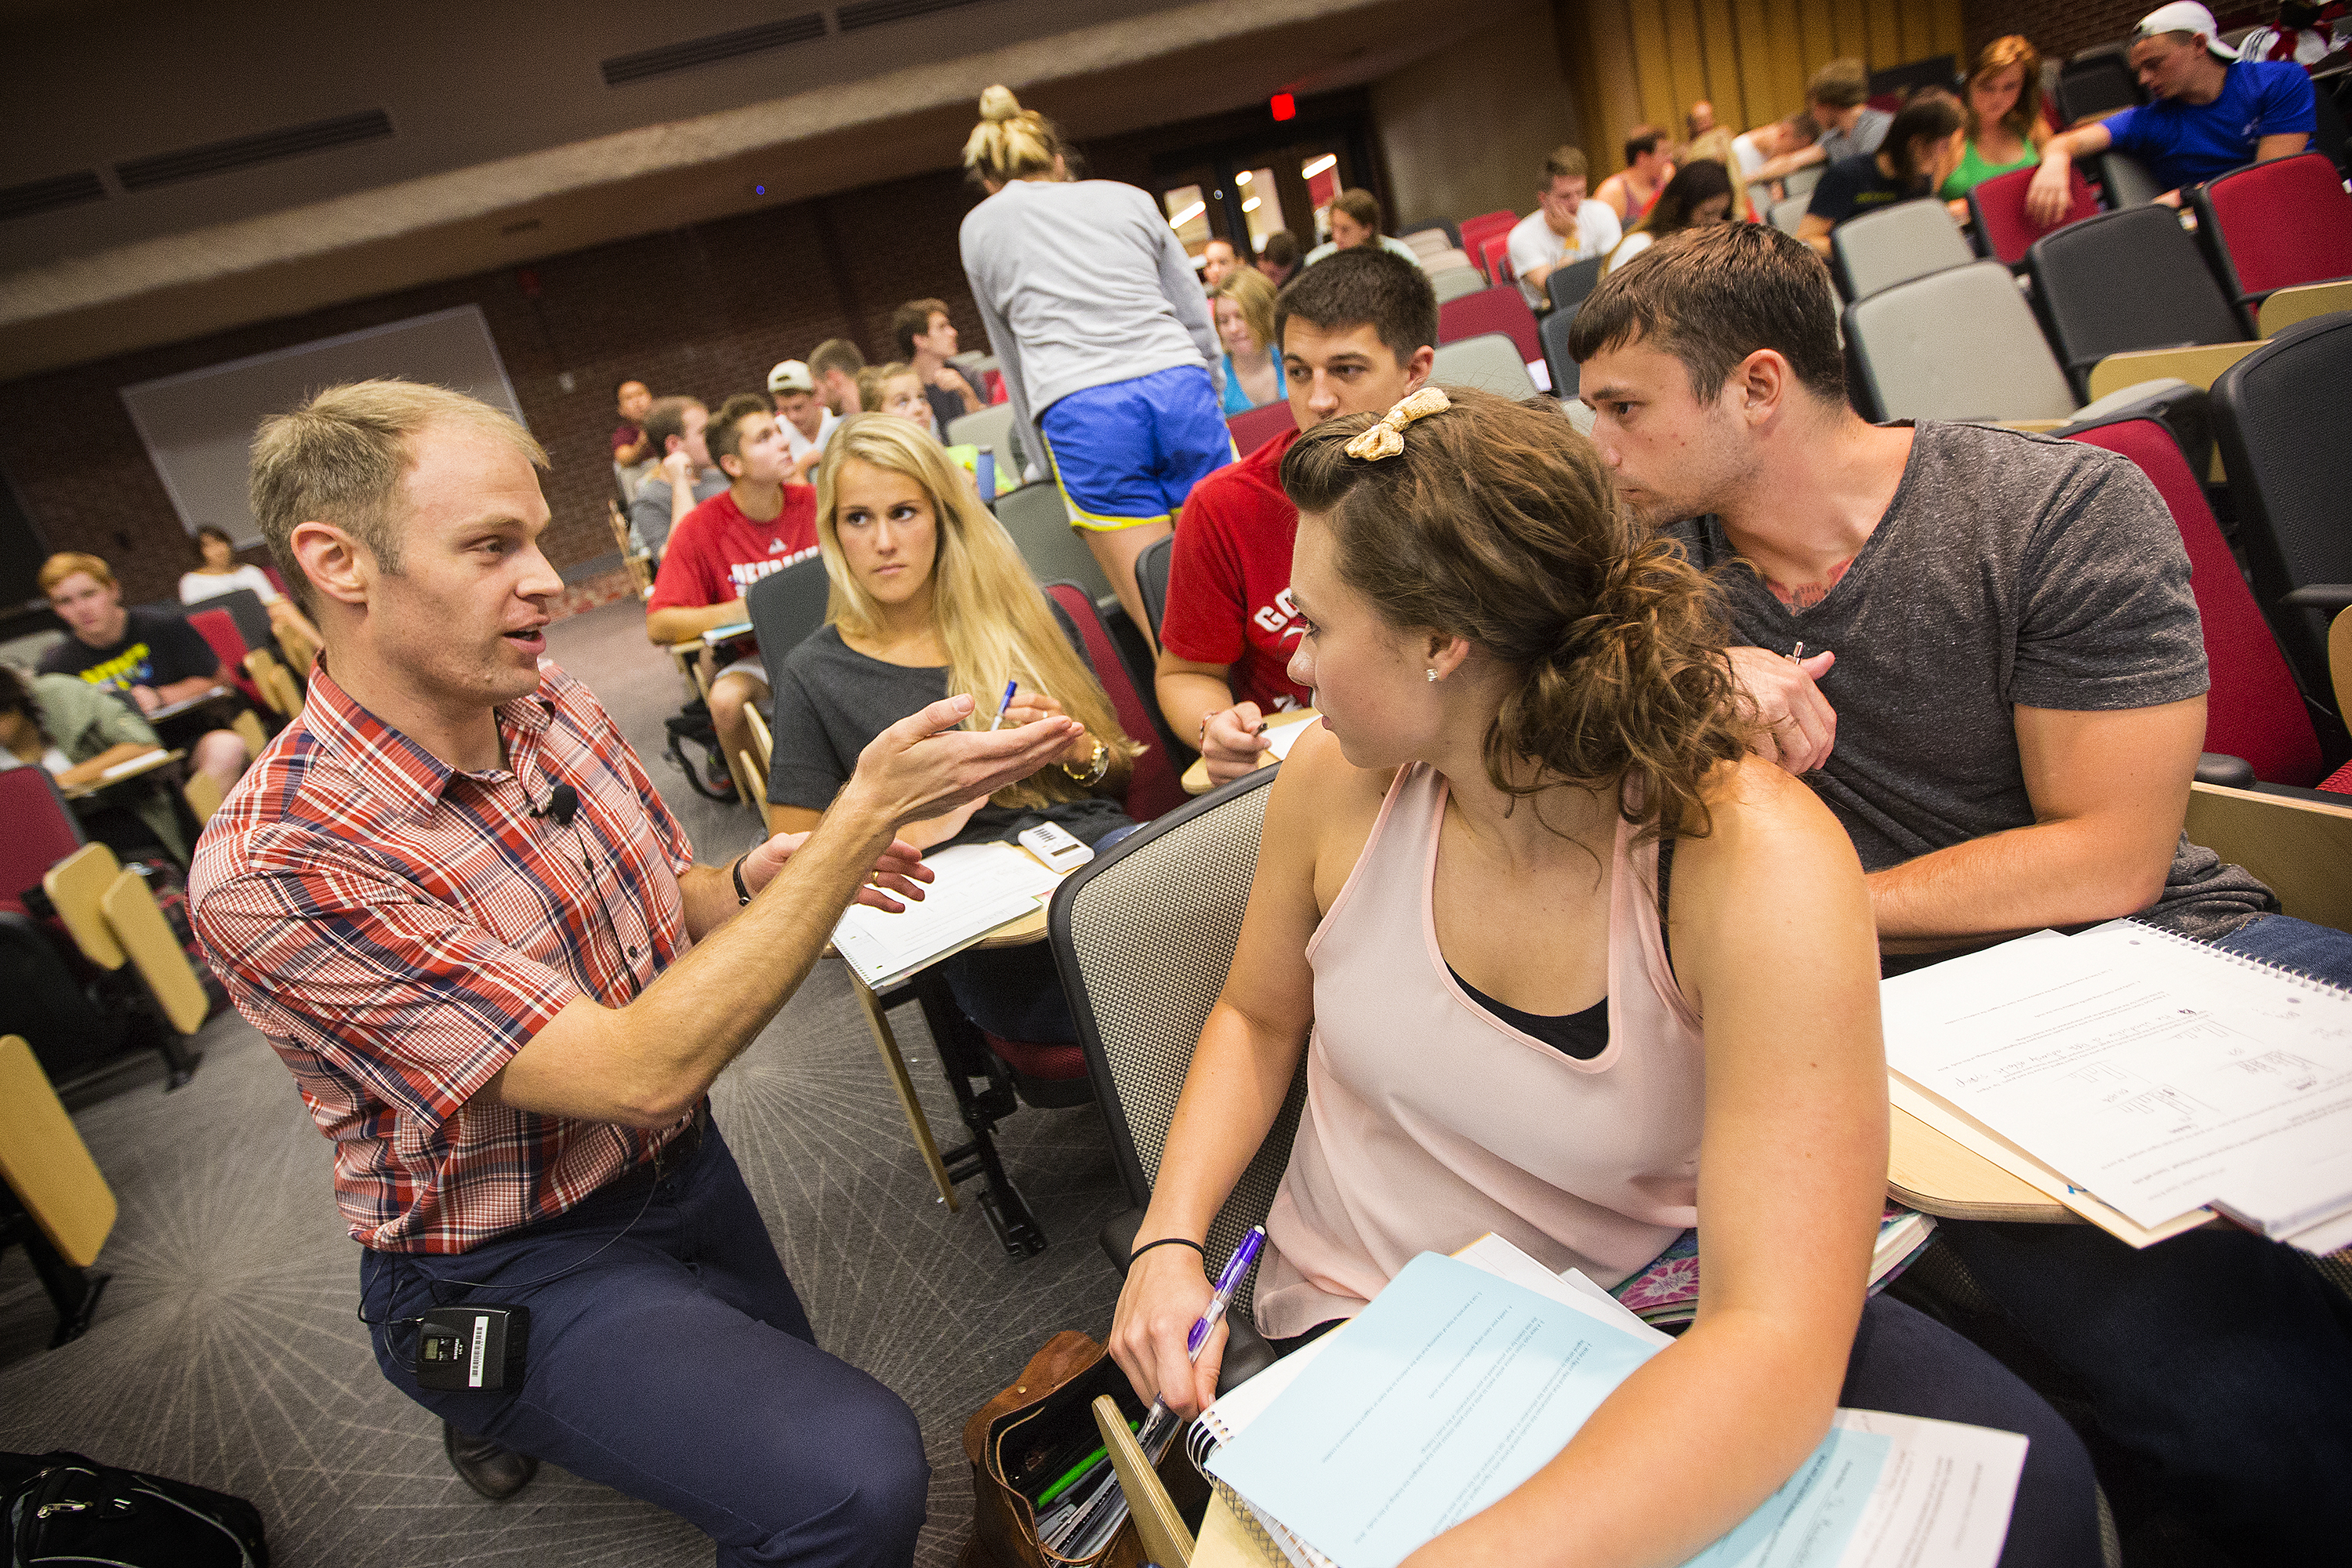 The University of Nebraska-Lincoln is proud of its incredible faculty and staff, who will be right there to support you in your academic career.